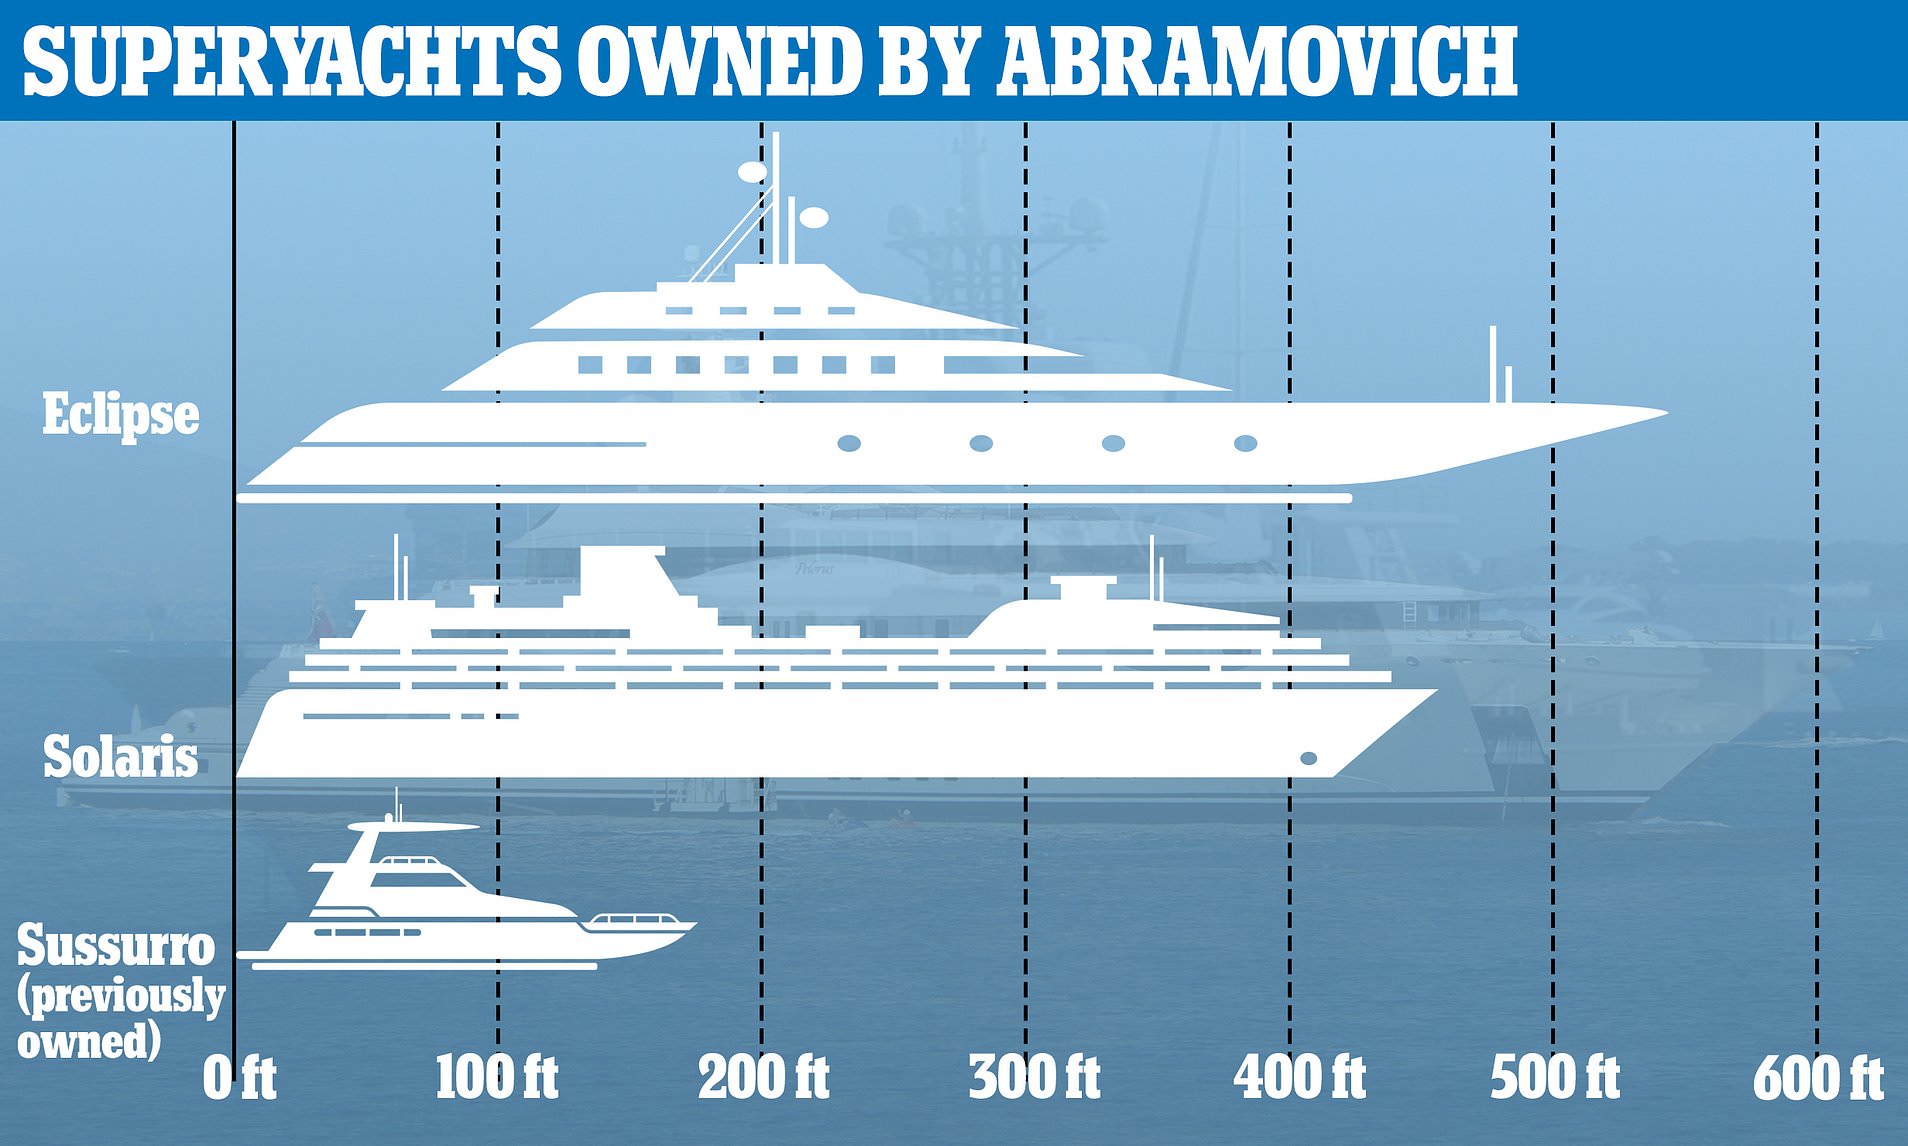 Roman Abramovich's £430m buoy's toy! A yacht with eight decks and anti-paparazzi lasers | Daily Mail Online